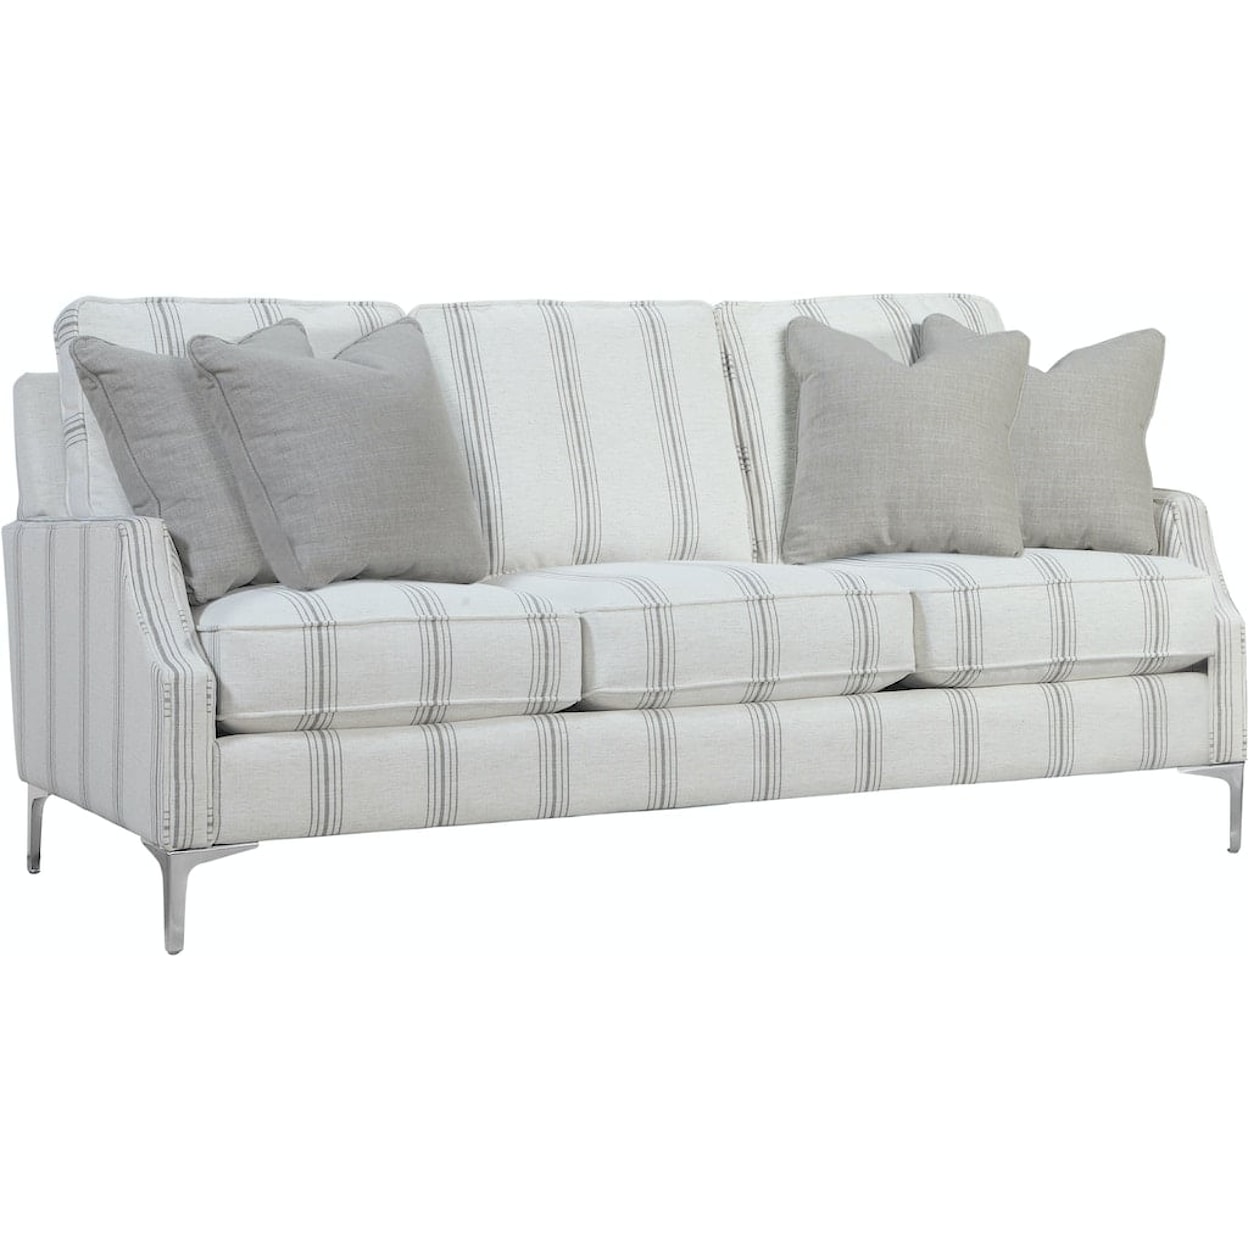 Braxton Culler Urban Options Urban Options 3 over 3 Sofa with Metal Legs